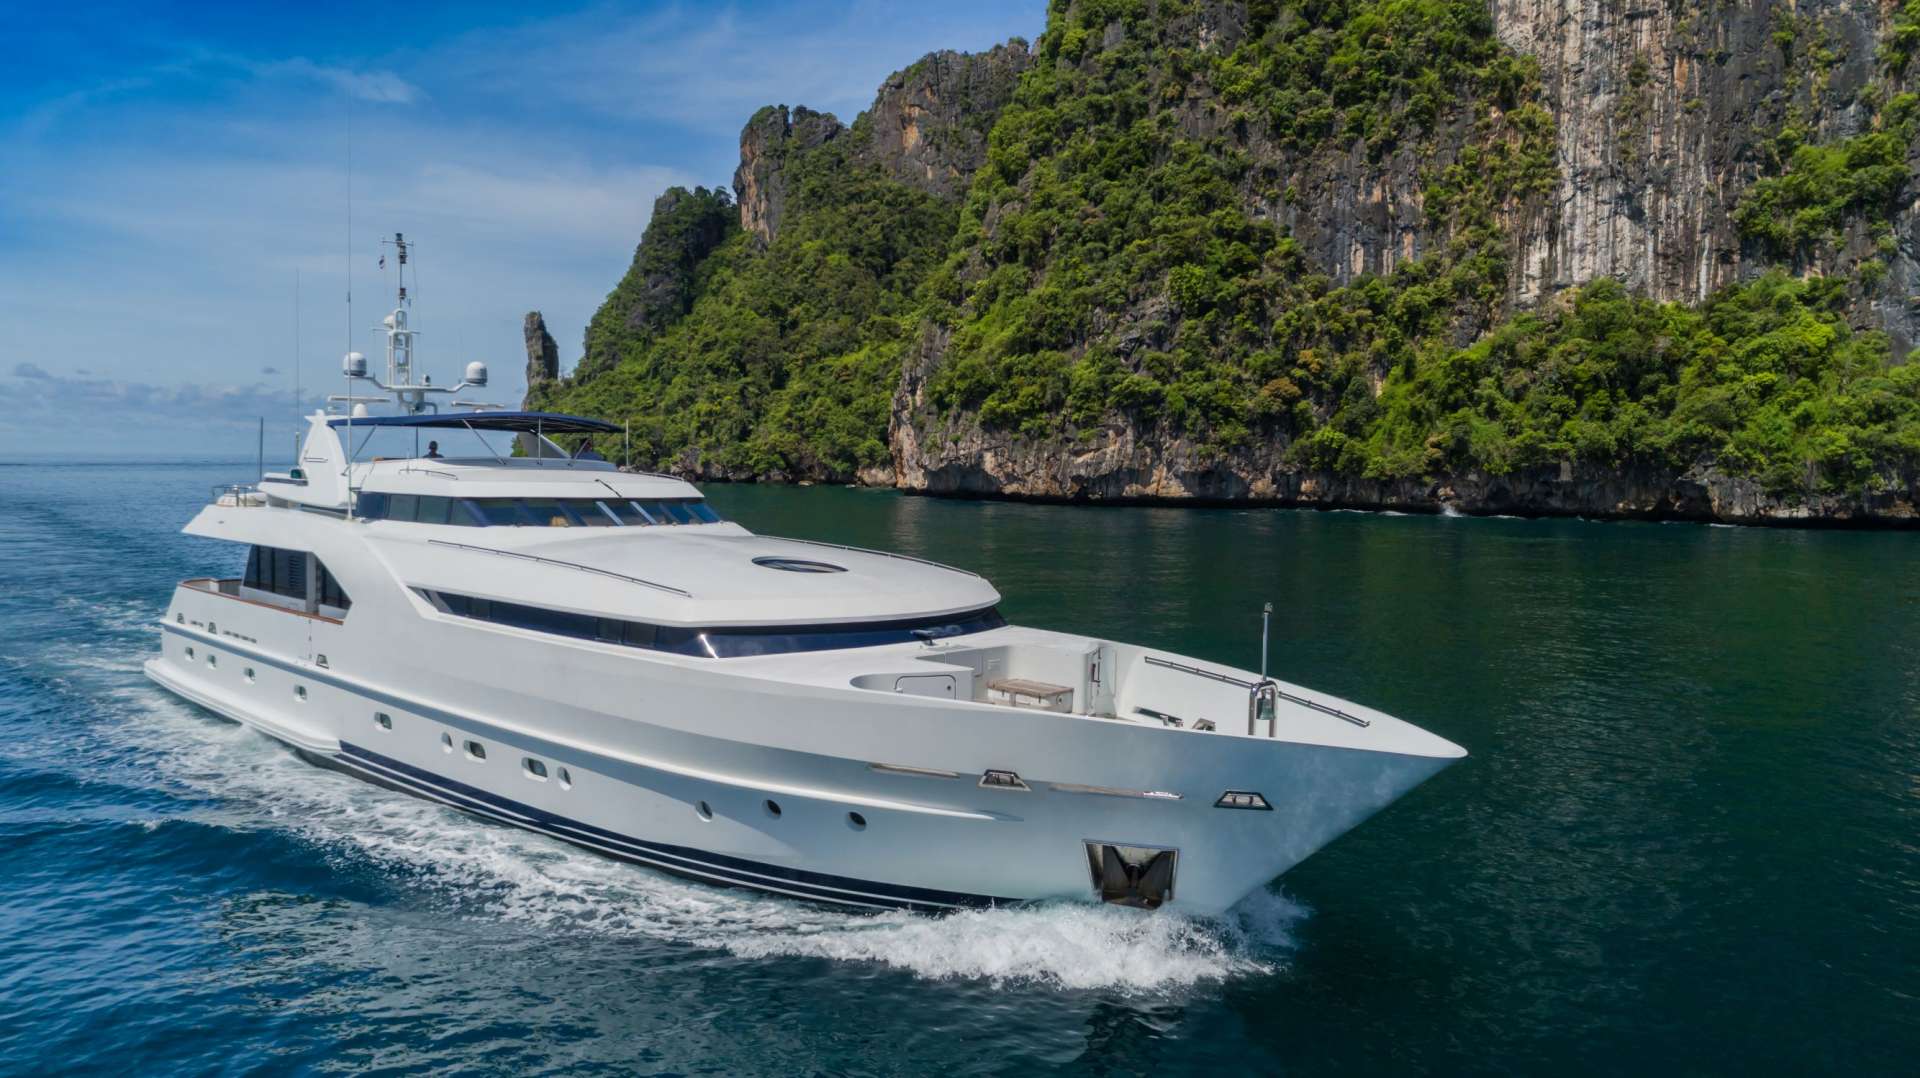 xanadu of london - Superyacht charter Thailand & Boat hire in SE Asia 1